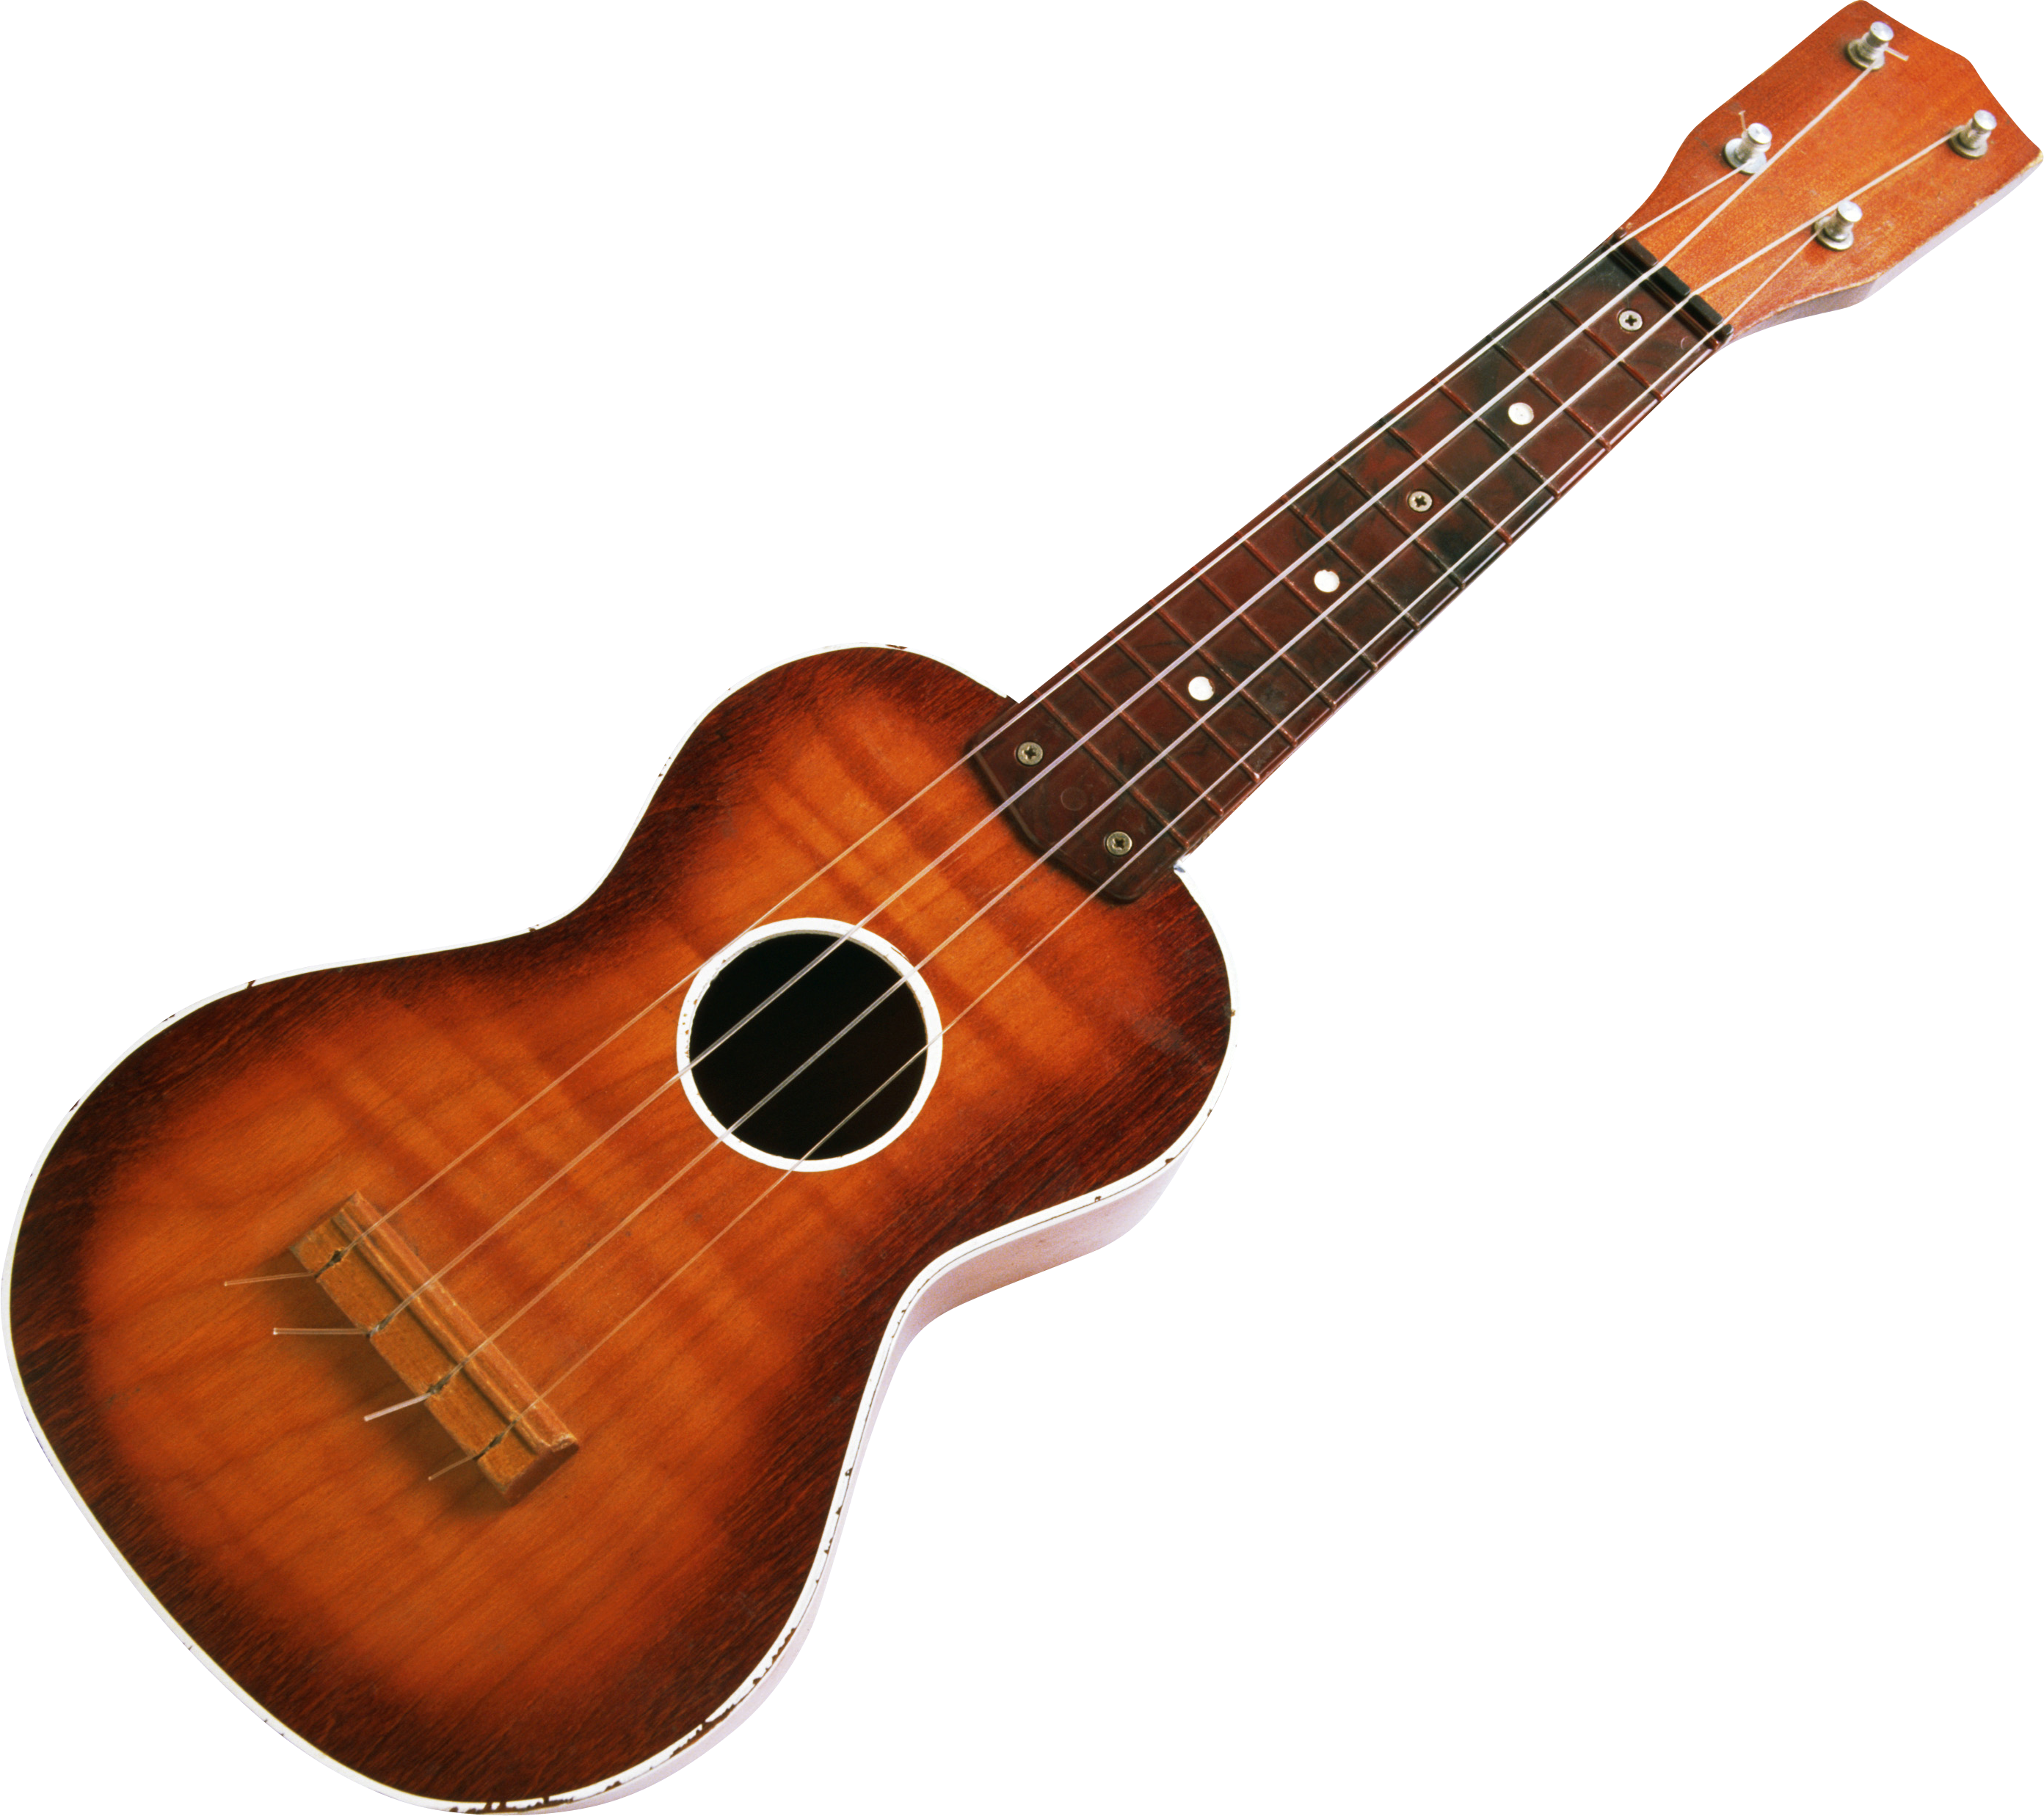 Guitar clipart glitter. Png images free picture